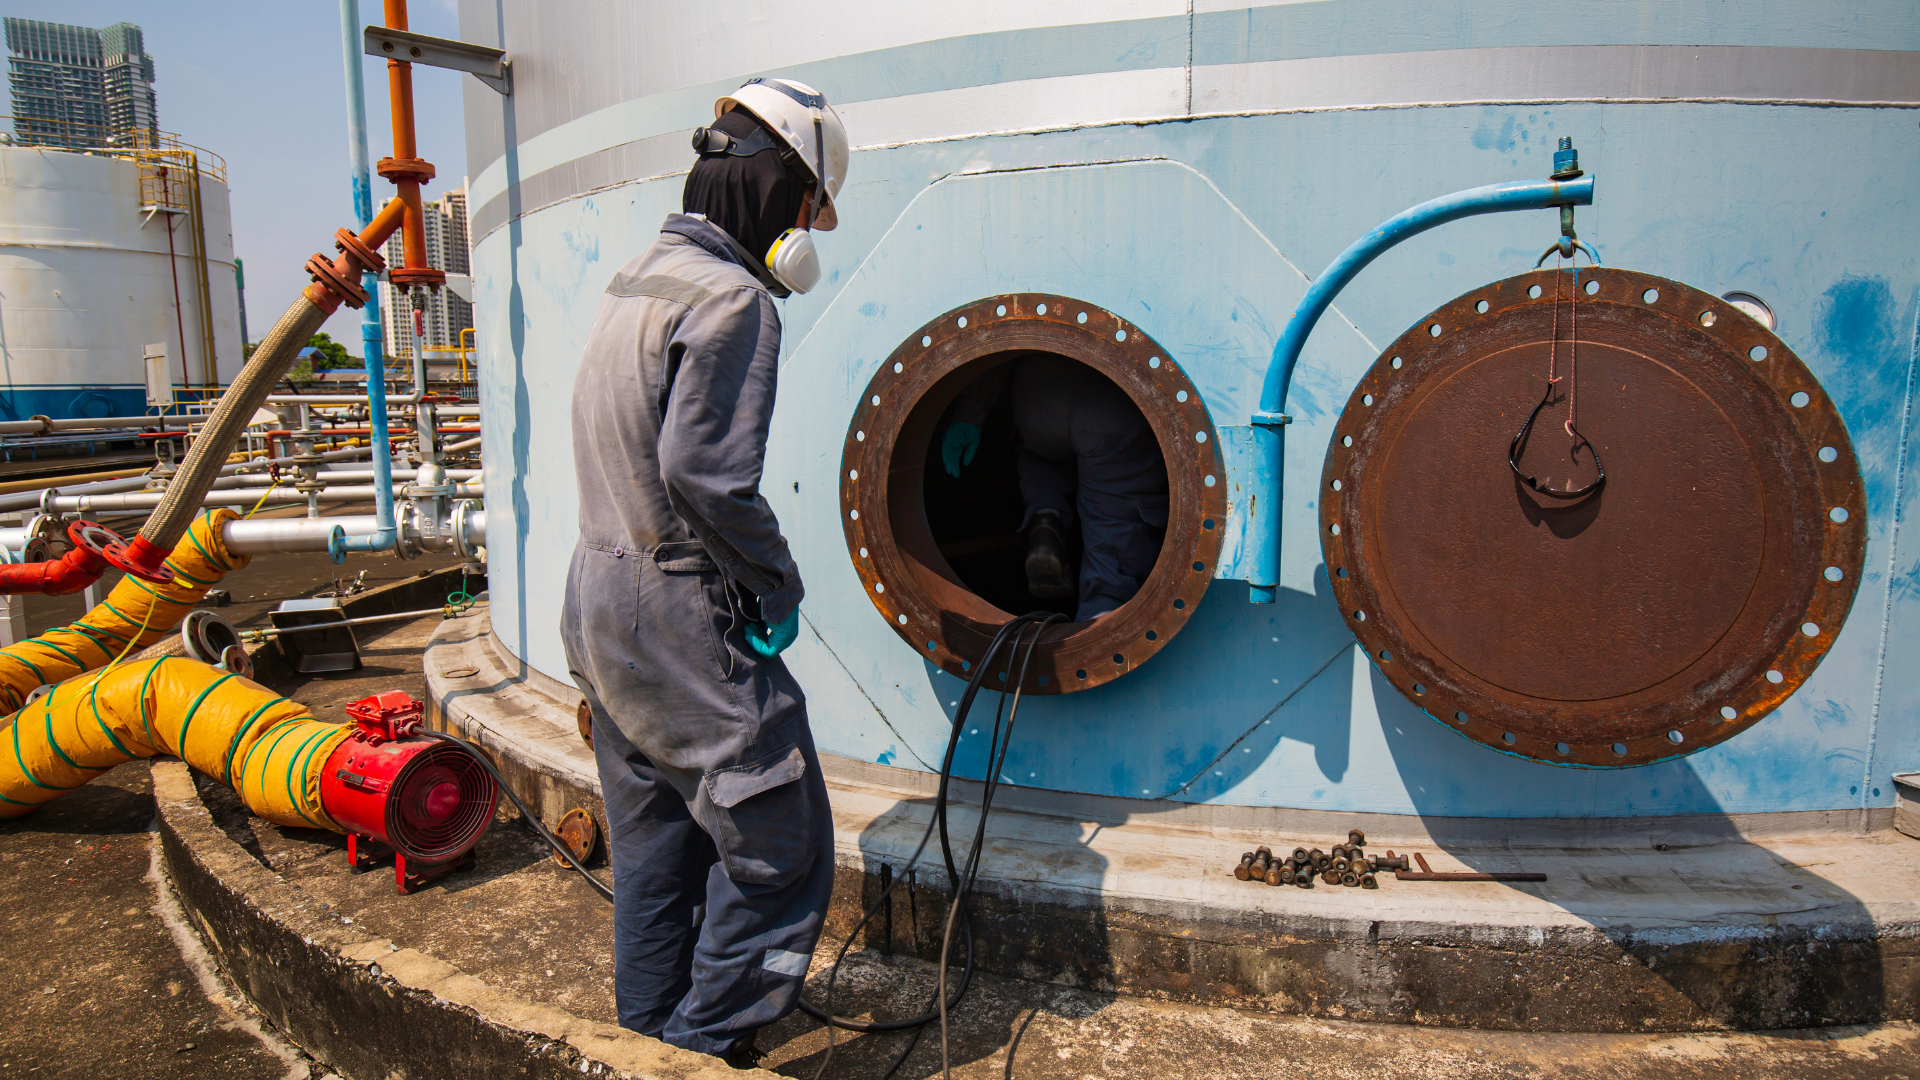 How Often Should Atmospheric Testing Be Done in a Confined Space?